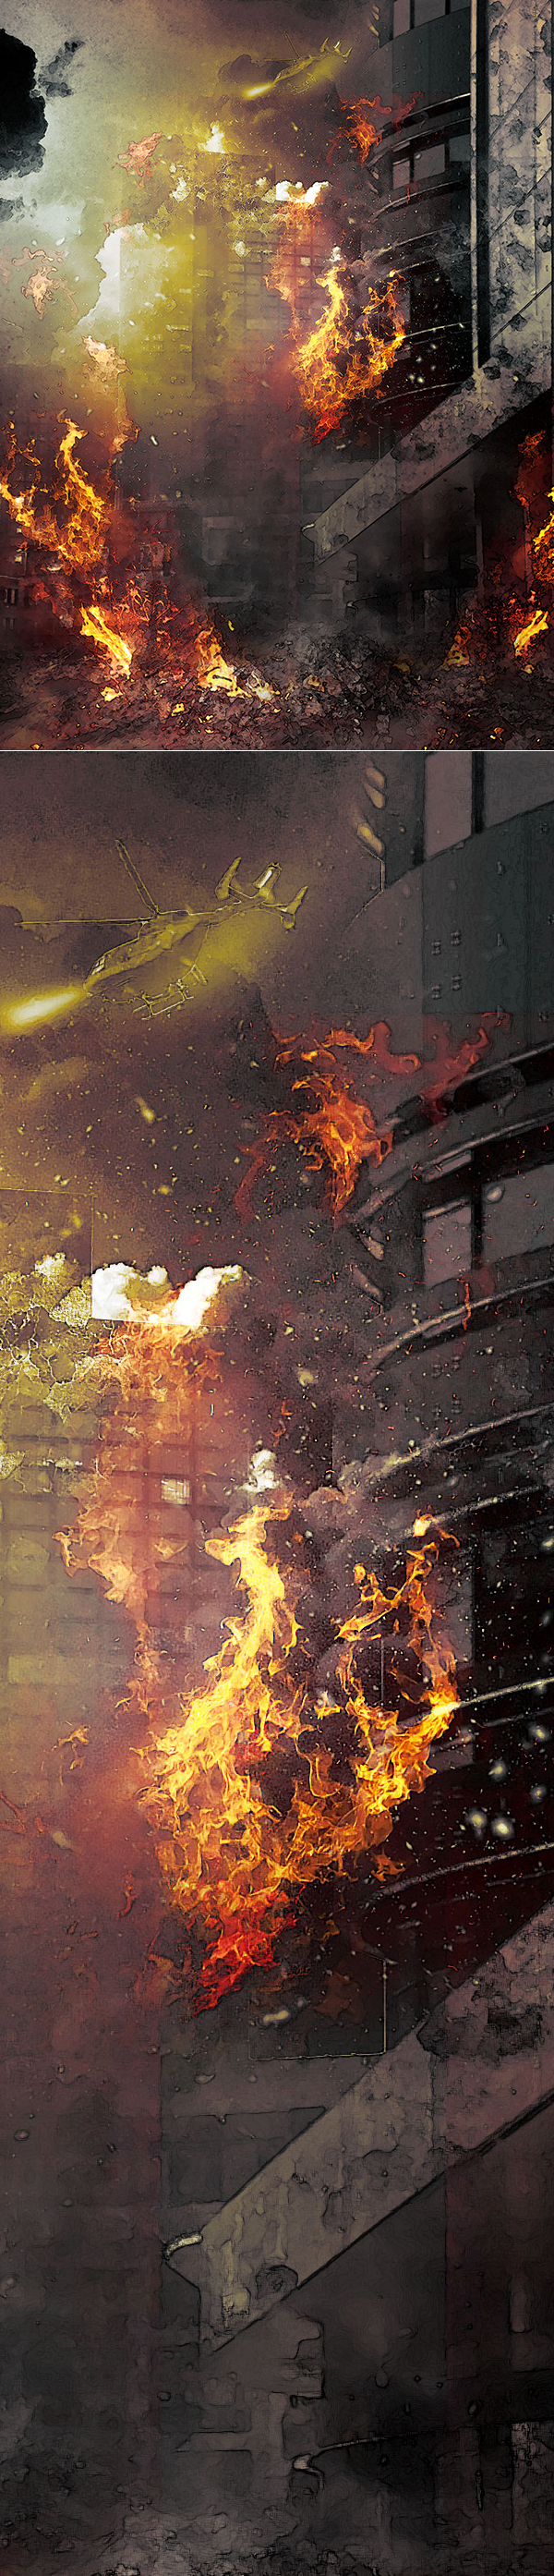 Create High-Rise Building on Fire Effect in Photoshop Tutorial